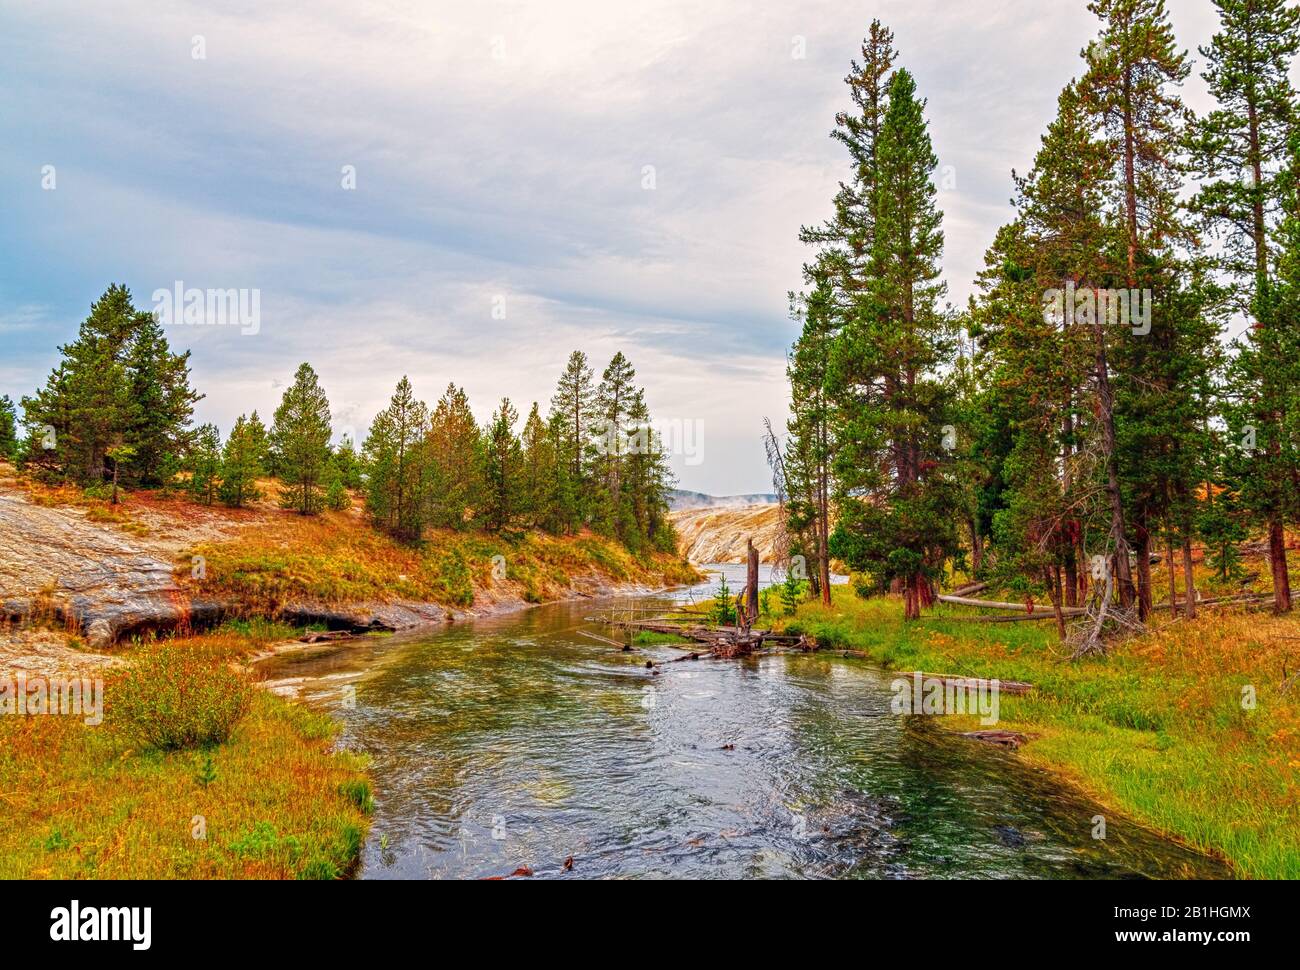 Slow running river cuts through green grassy valley with tall pine trees under a cloudy sky. Stock Photo